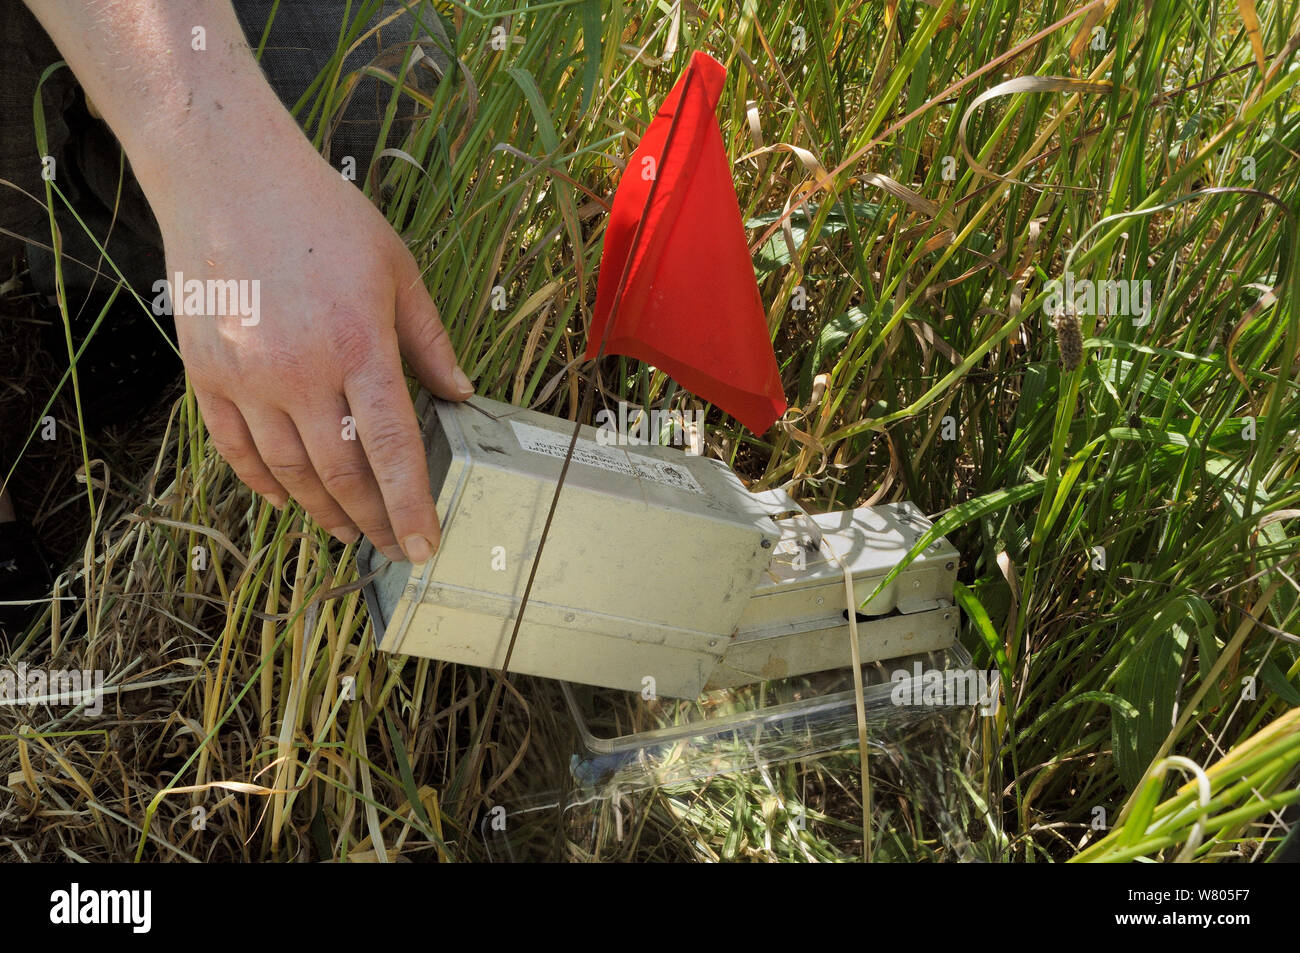 Researcher placing small mammal trap in field enclosure to survey Harvest mice (Micromys minutus) after release, Moulton, Northampton, UK, June.  Model released. Stock Photo